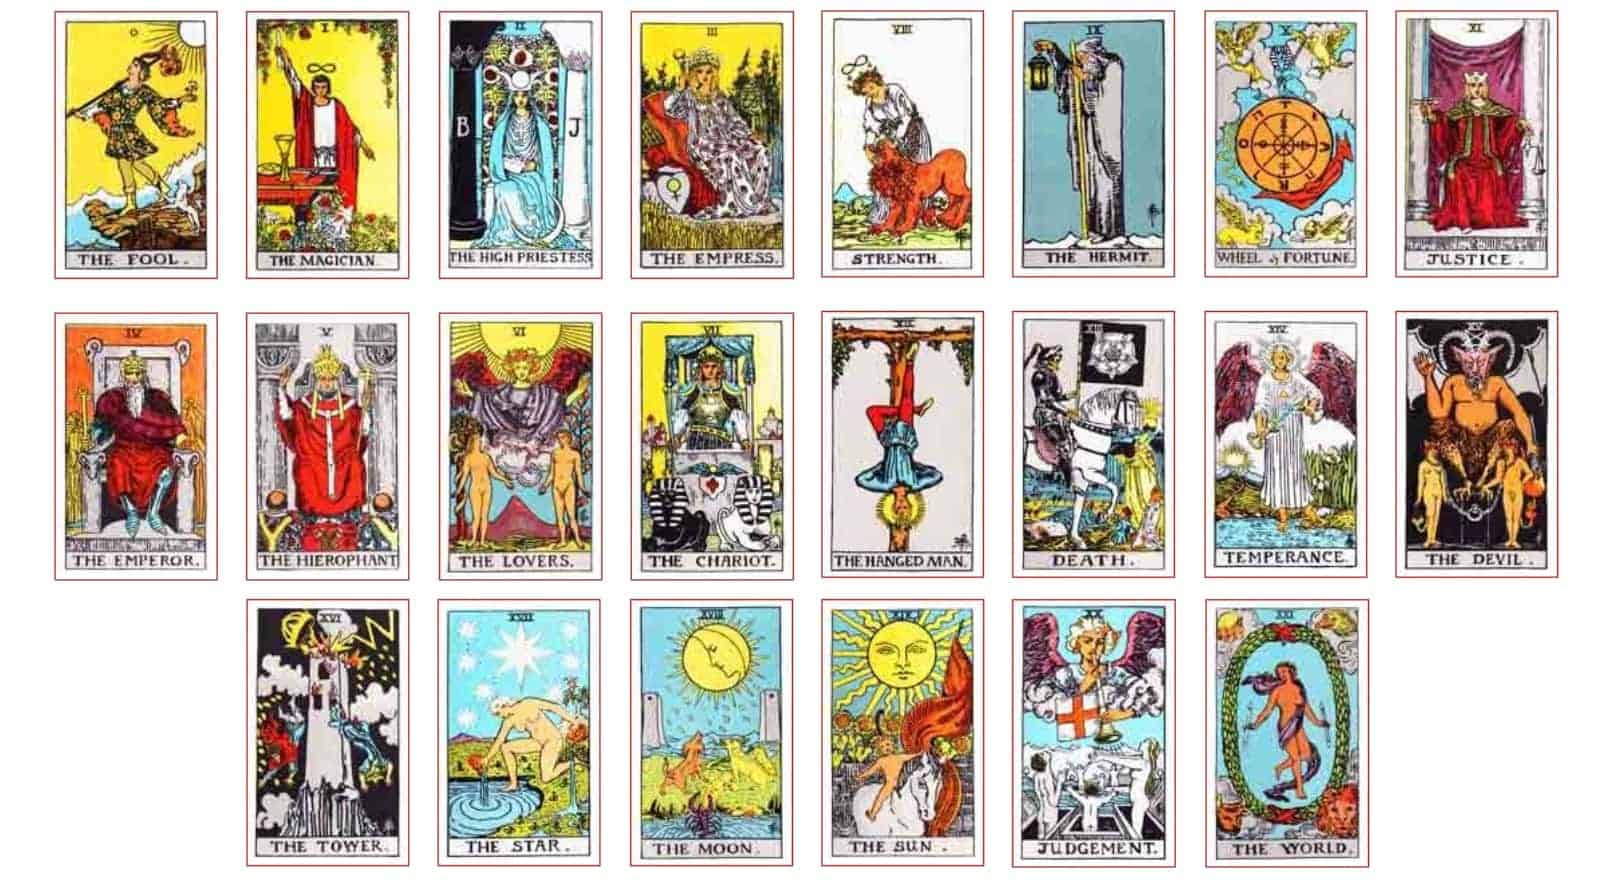 Complete 78 Cards List with their True Meanings